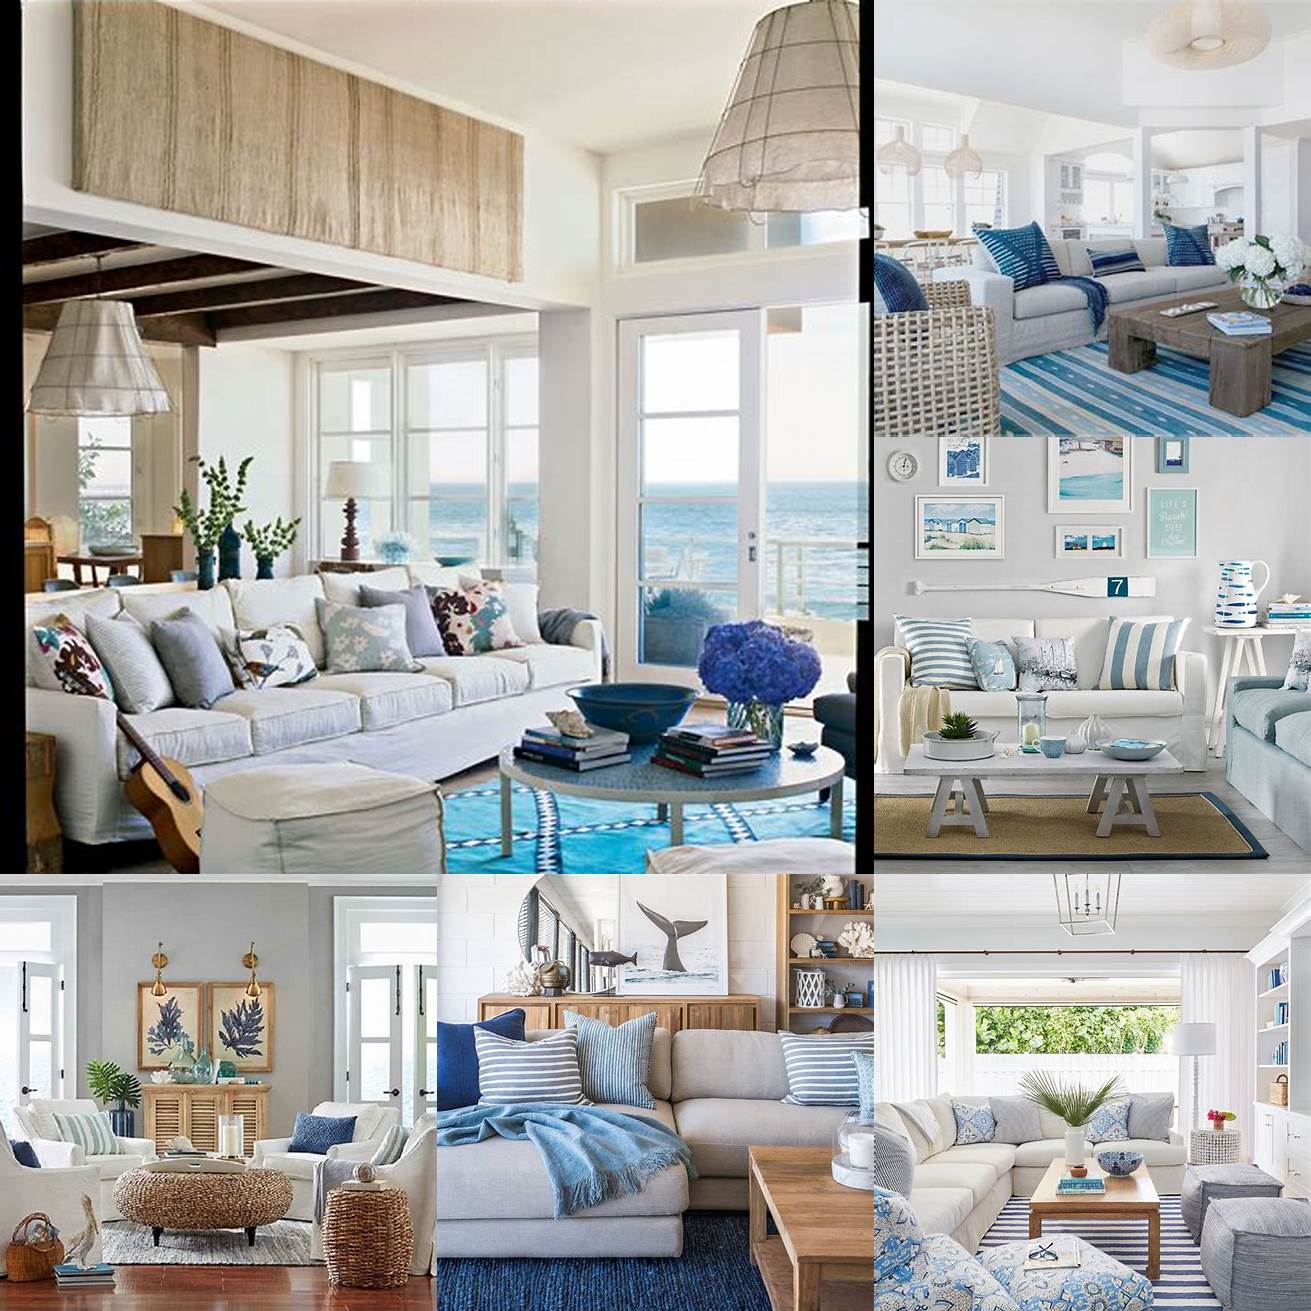 A room with a beachy vibe